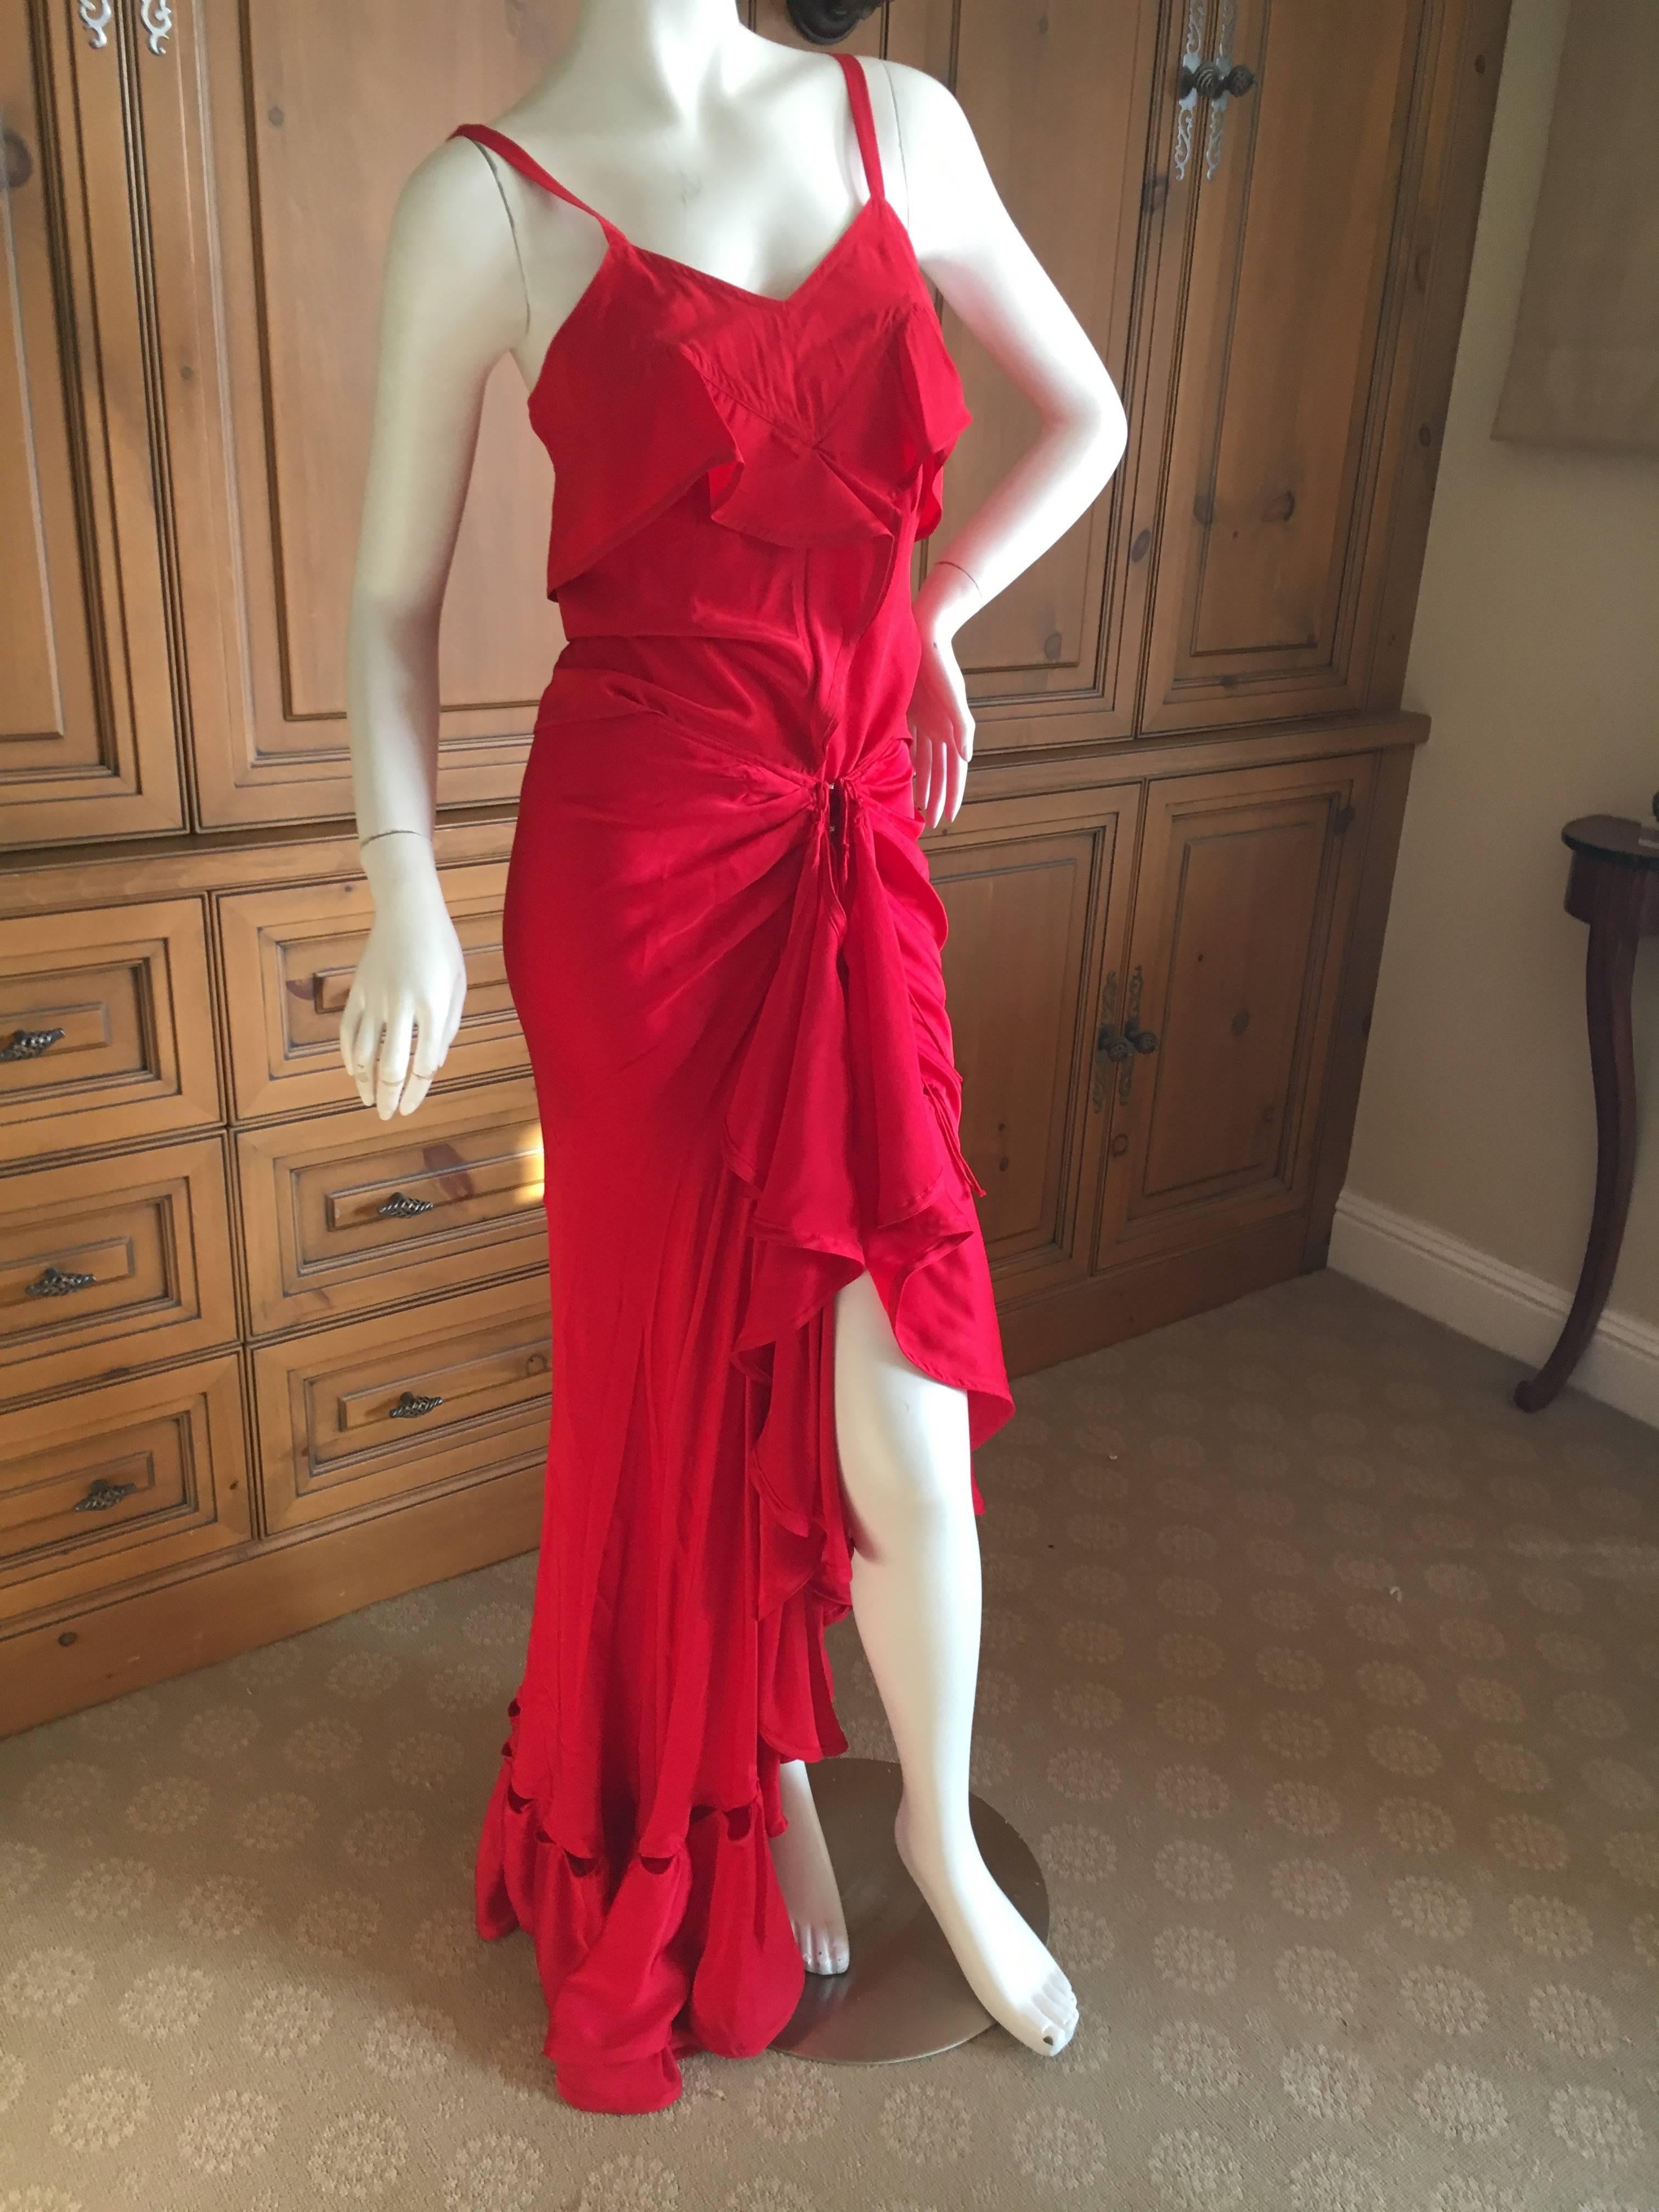 Romantic Yves Saint Laurent by Tom Ford Fall 2003 Red Two Piece Evening Dress.
Flamenco style skirt with ruffles and tank top.
Size 44, Runs small
Skirt;
Waist 26"
Hips 42"
Length 23"
Top;
Bust 36"
Waist 25
Length 23